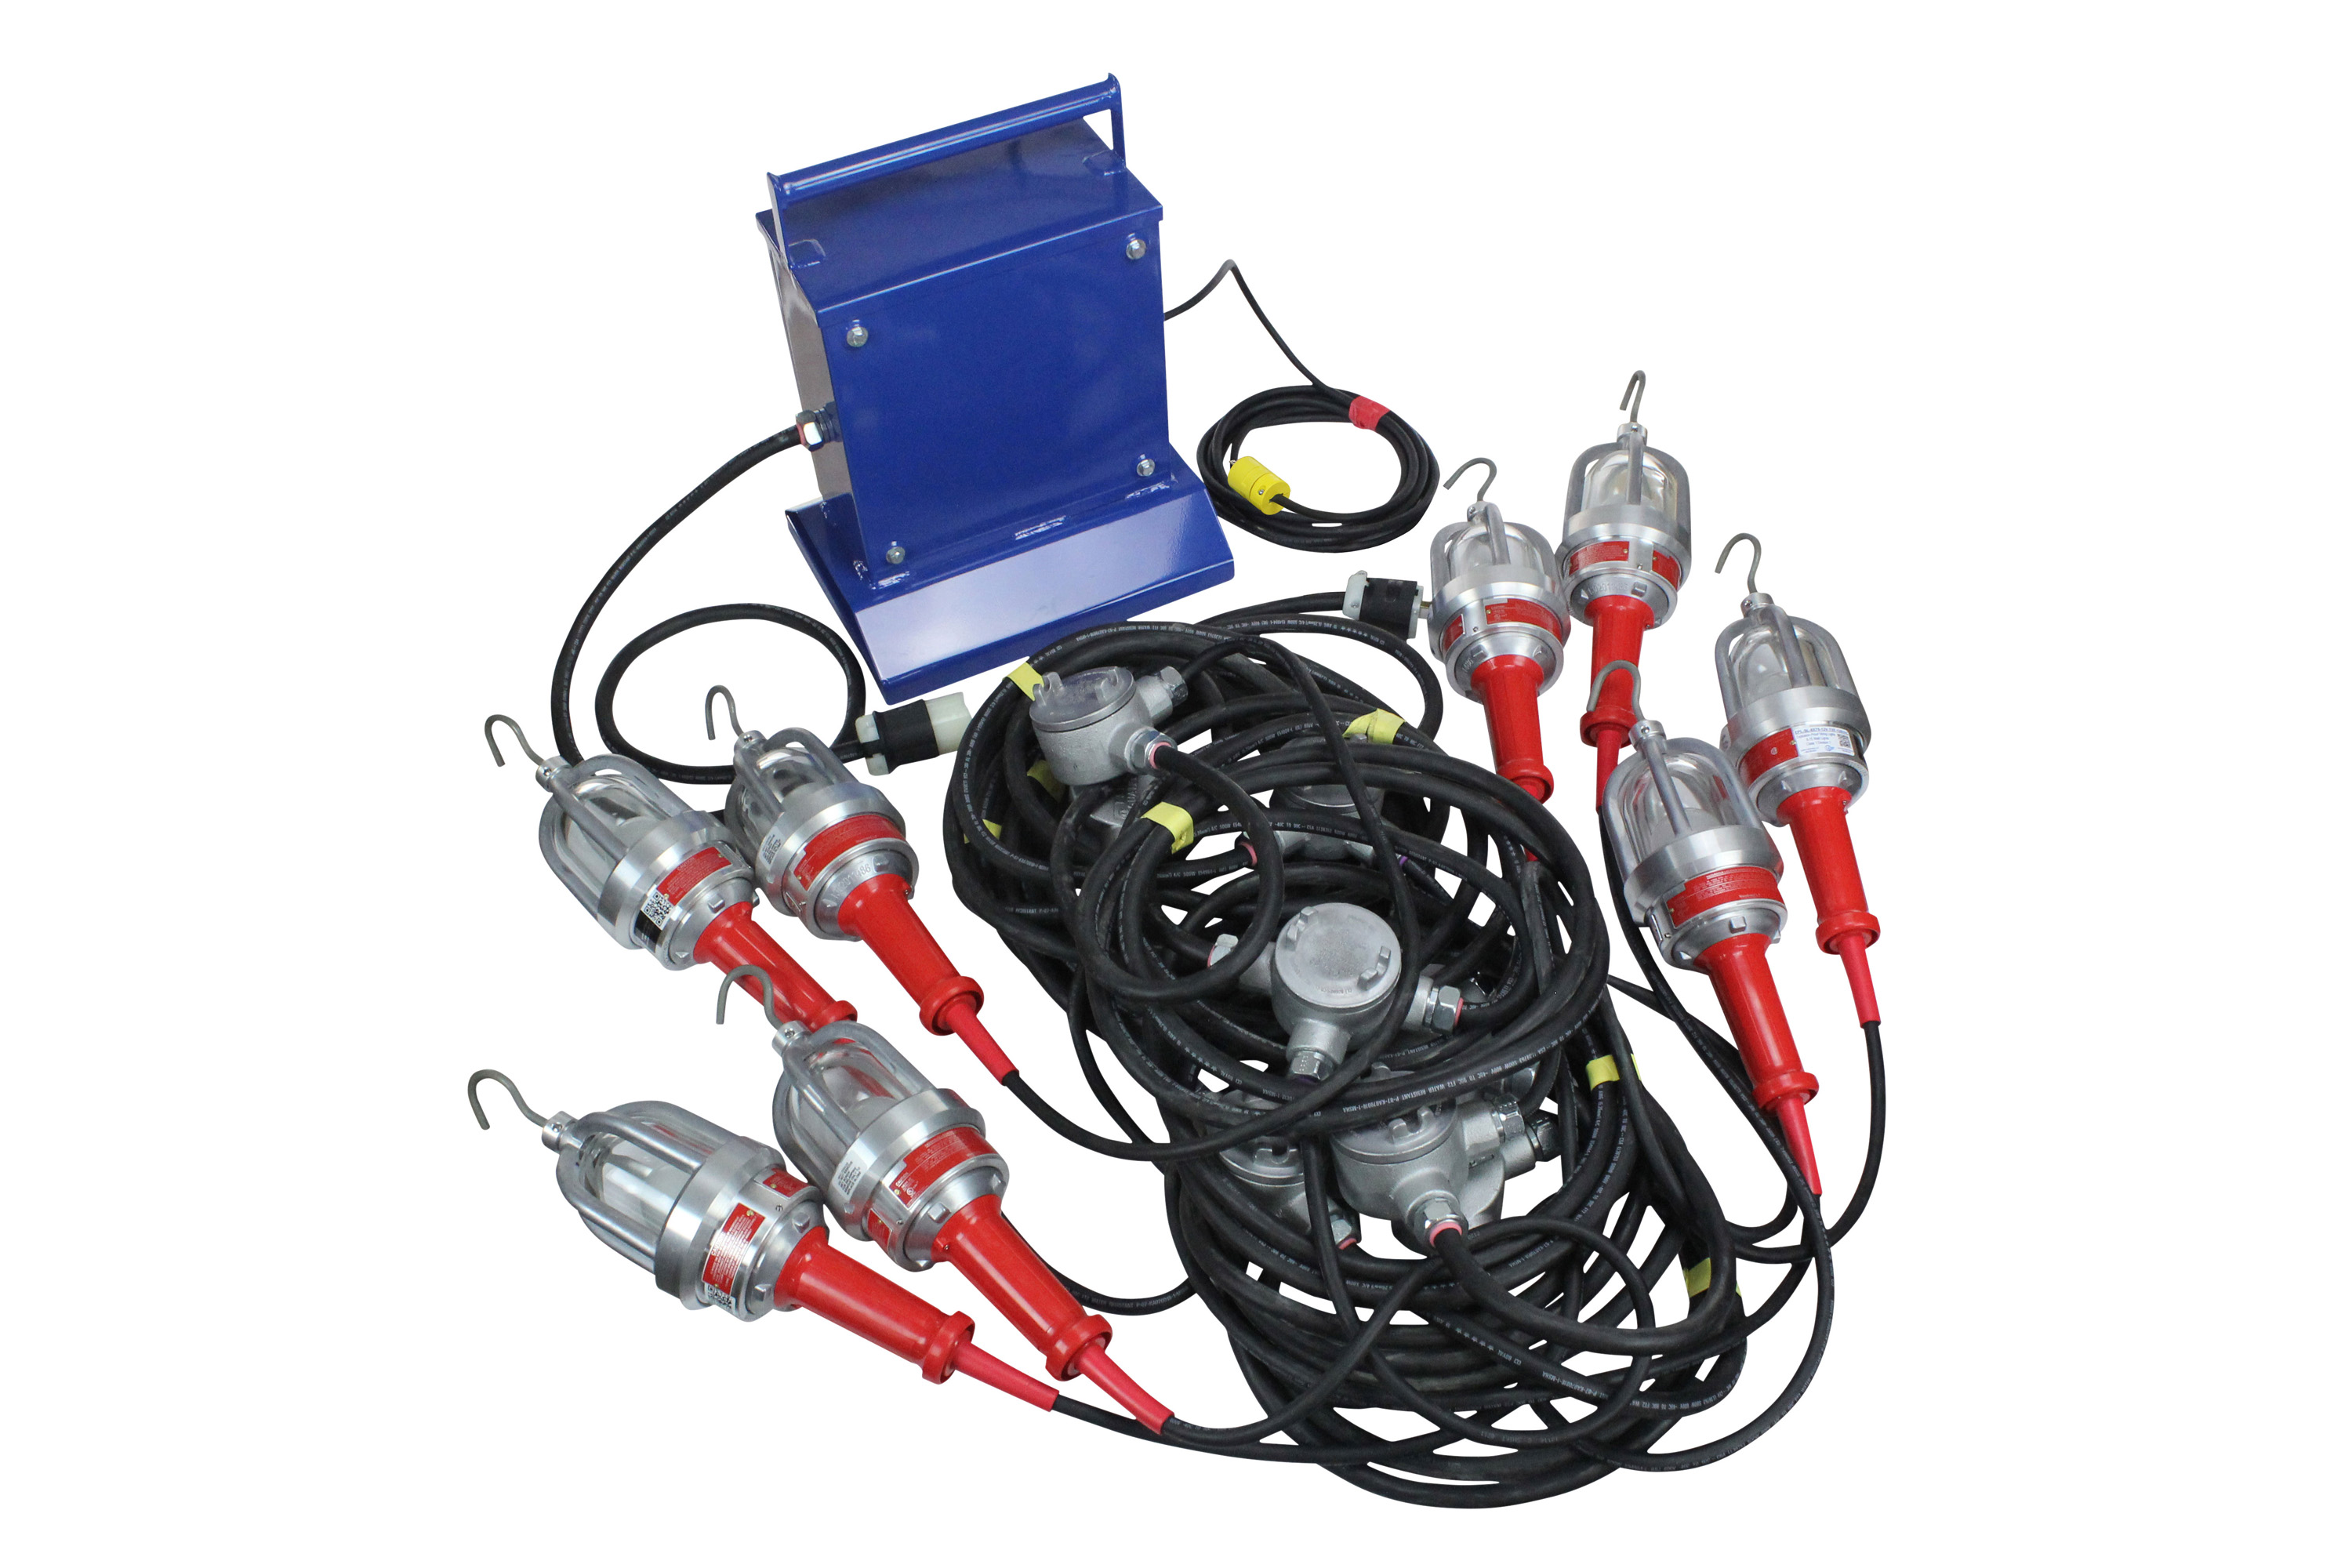 Explosion Proof String Light Set with 8 Drop Lights for use in Hazardous Locations